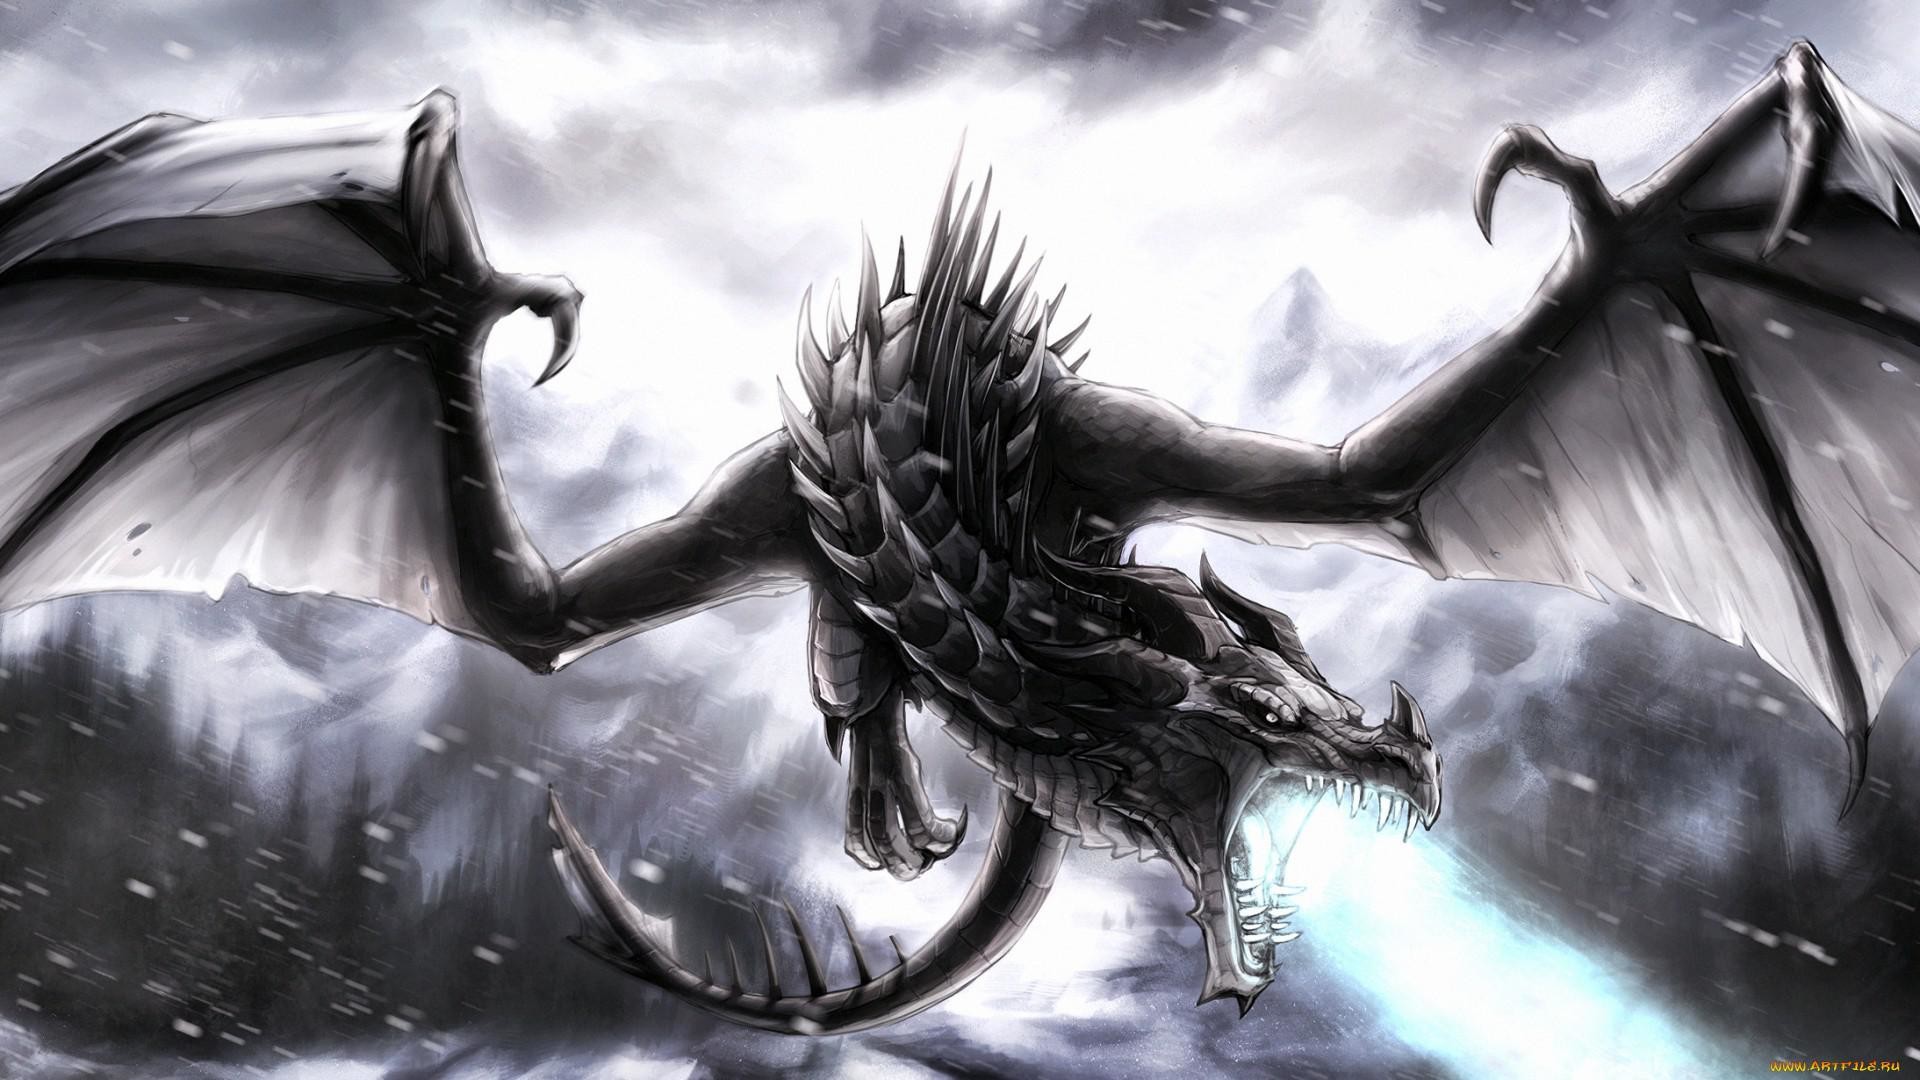 1920x1080 skyrim-dragon-wallpaper-picture-Is-Cool-Wallpapers.jpg